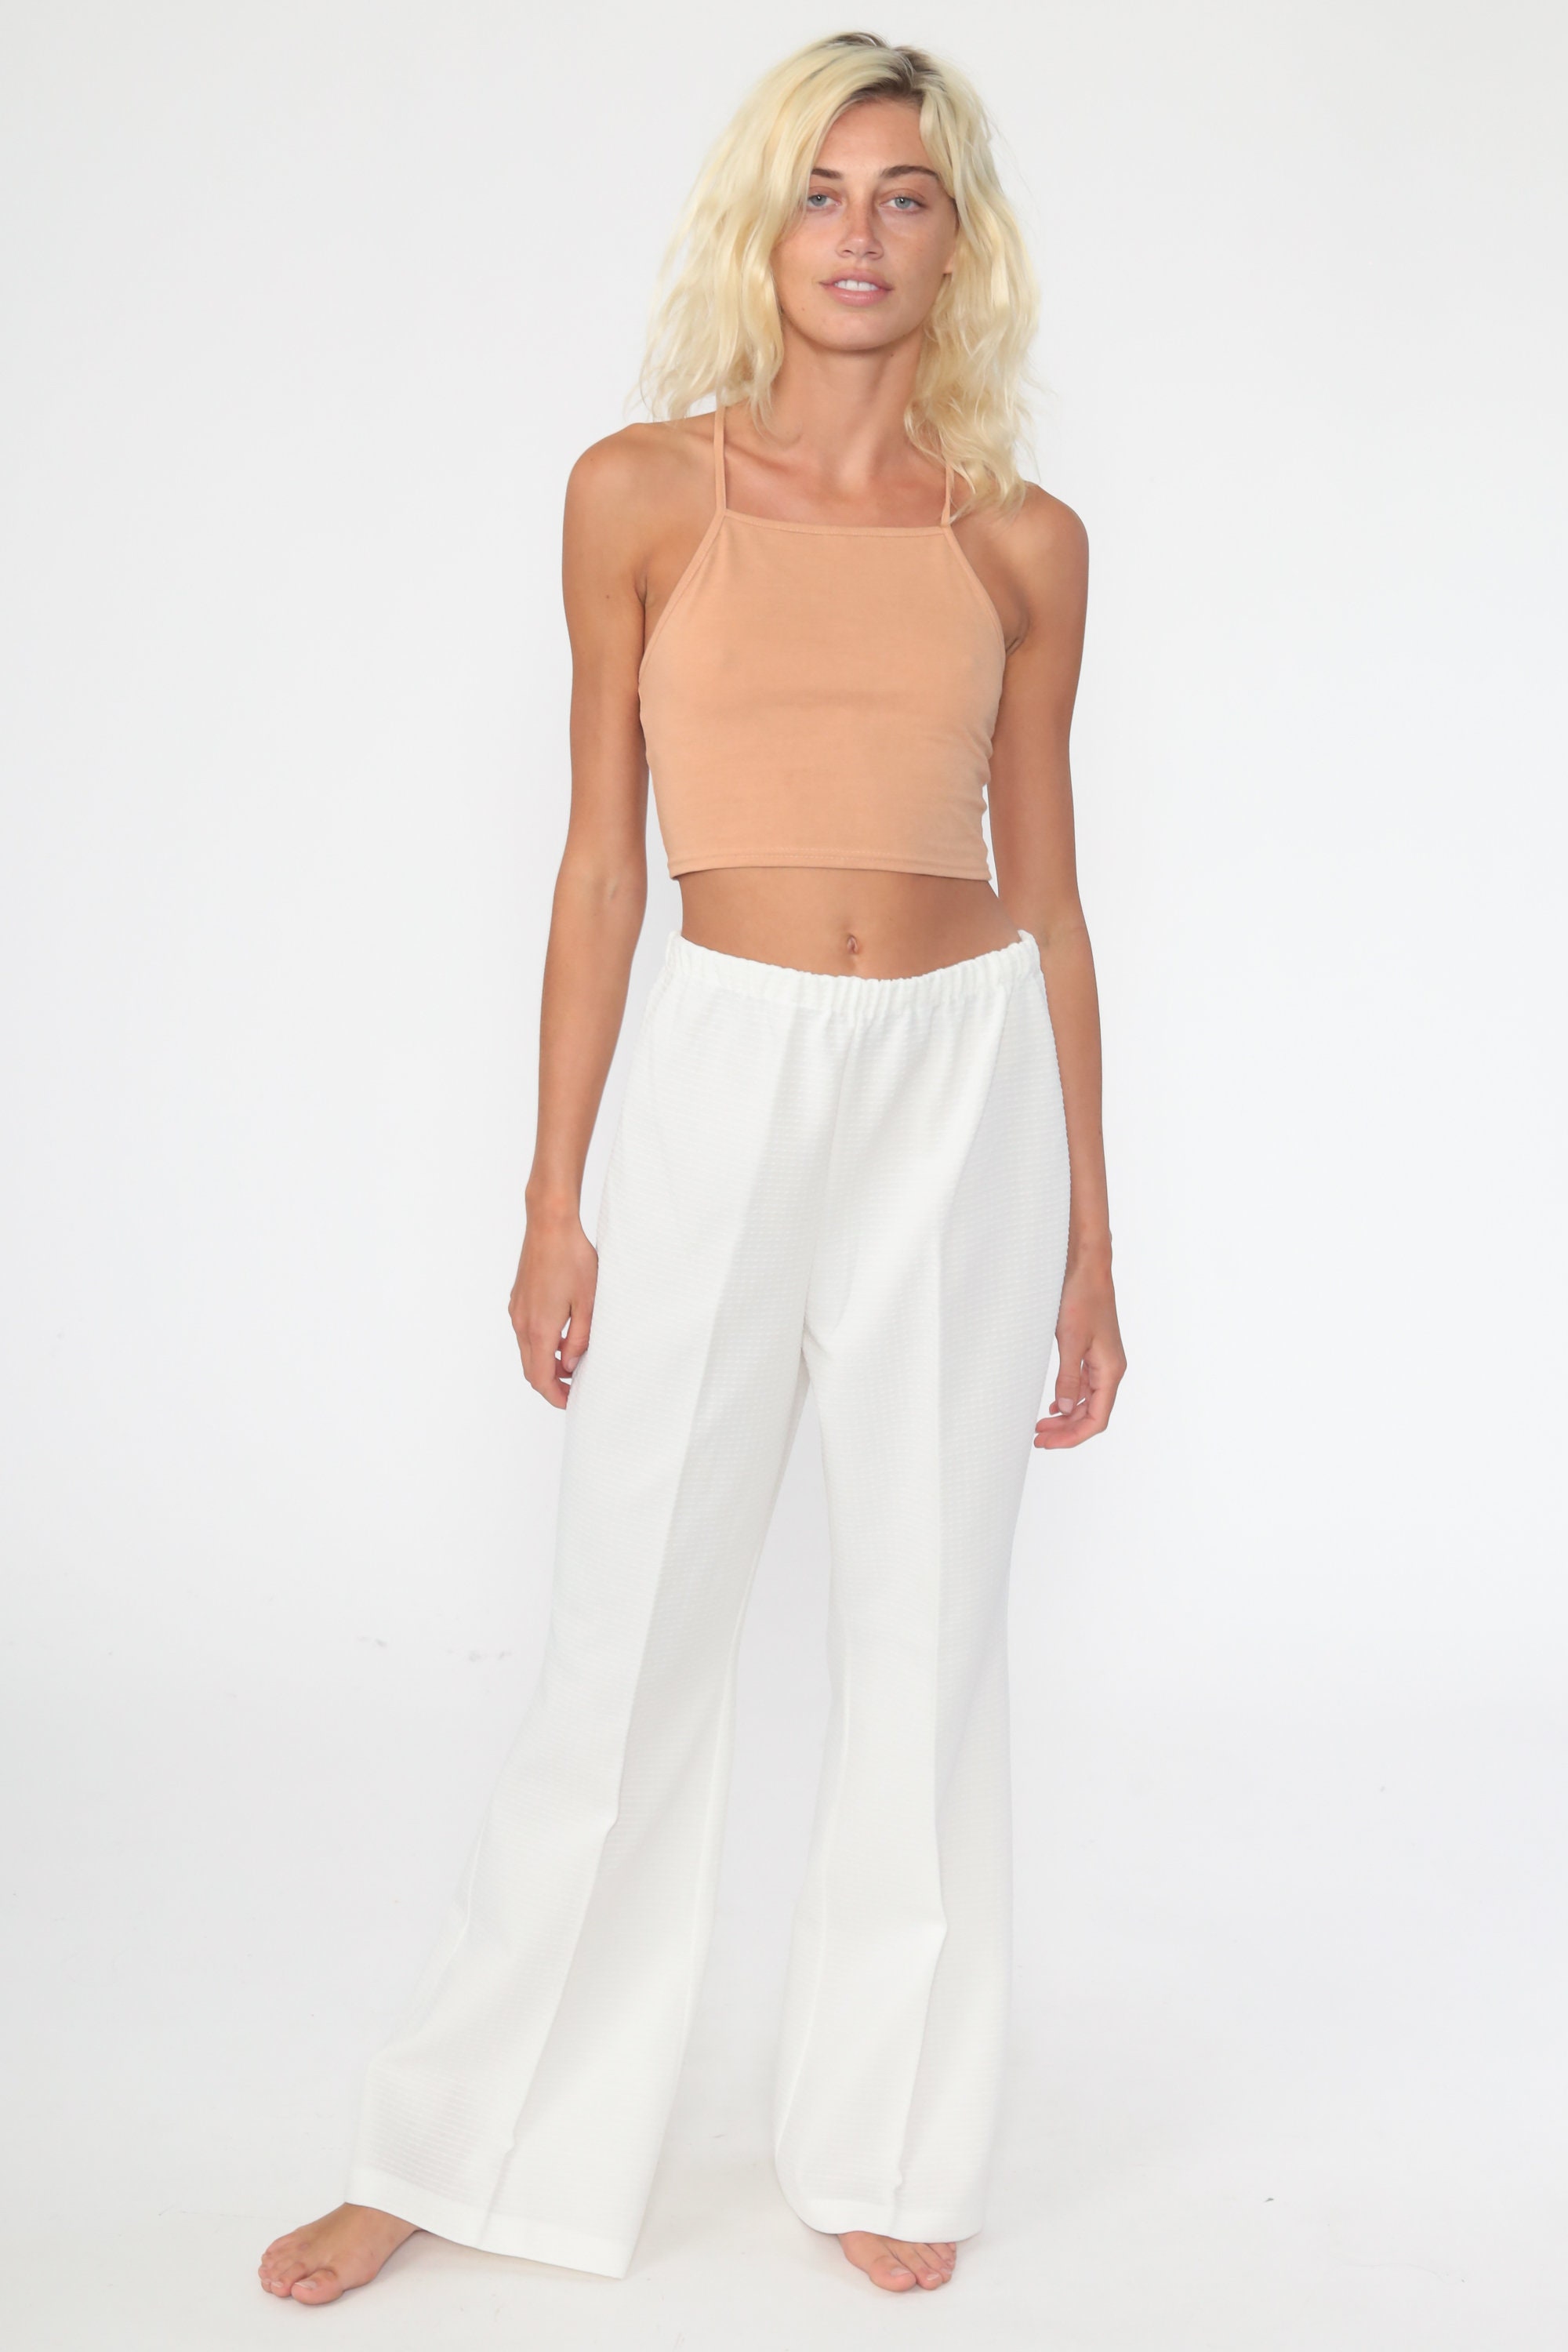 BELL BOTTOM Pants 70s Off-White Polyester High Waisted Trousers Boho ...